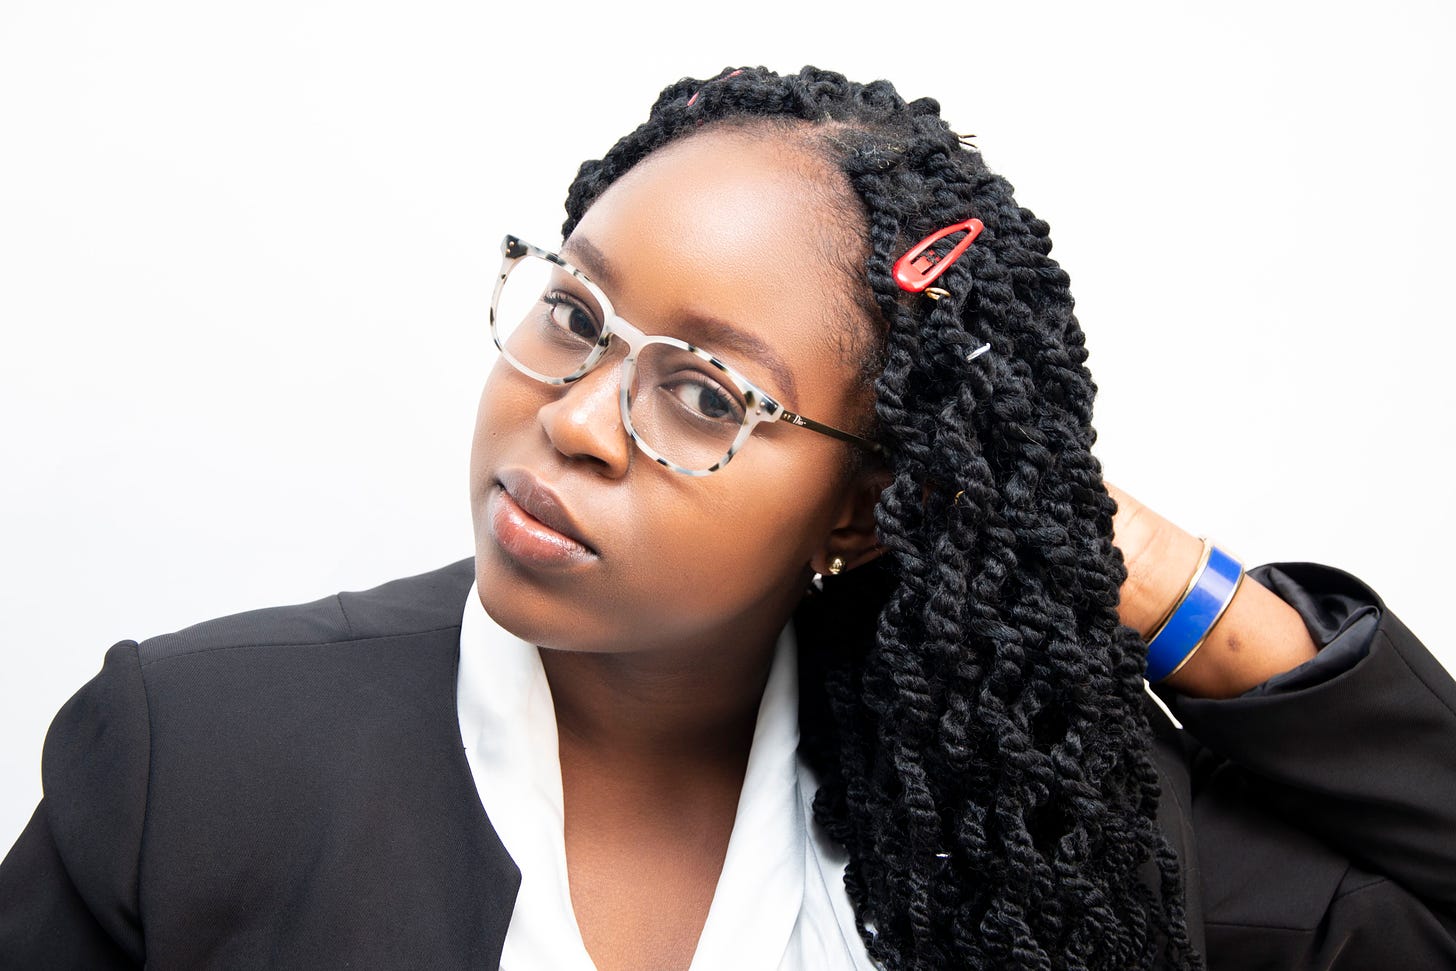 Headshot of Tolulope, a Nigerian woman with glasses and long black hair wearing a black suit